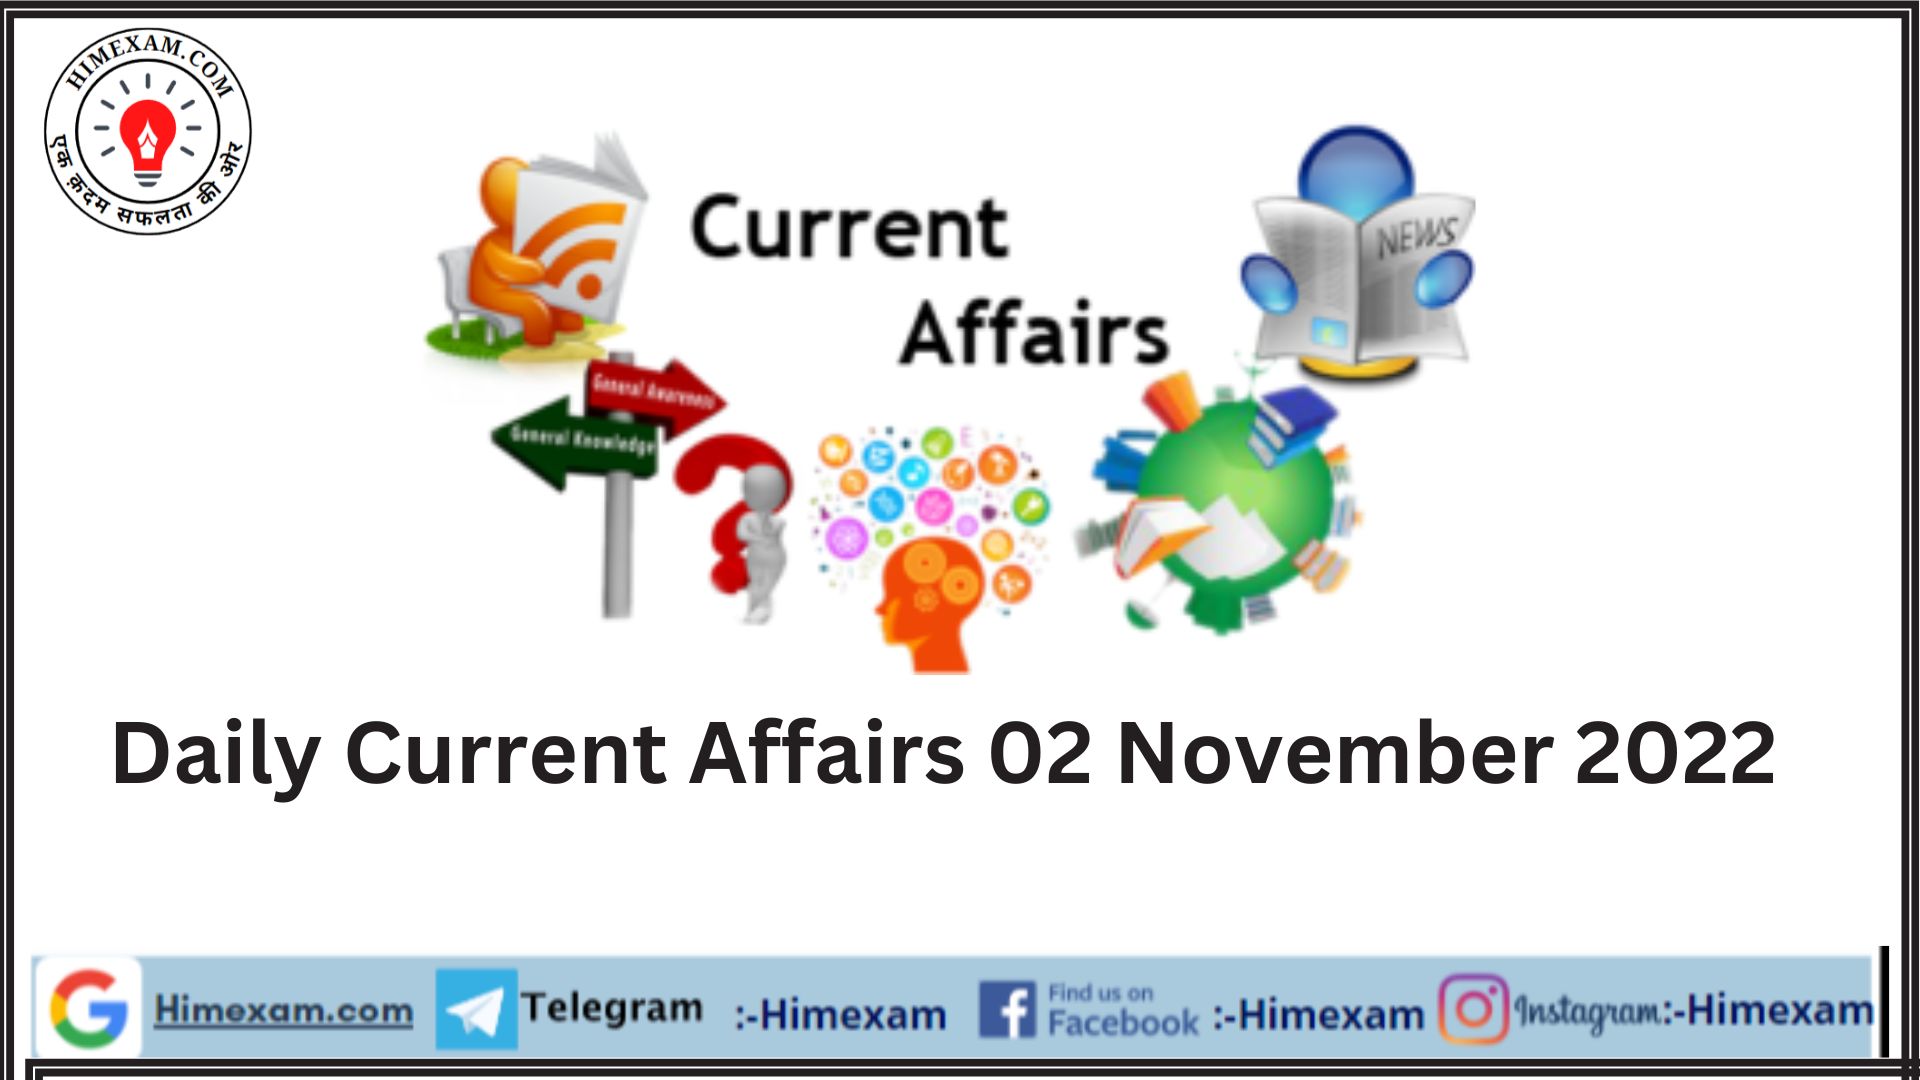 Daily Current Affairs 02 November 2022